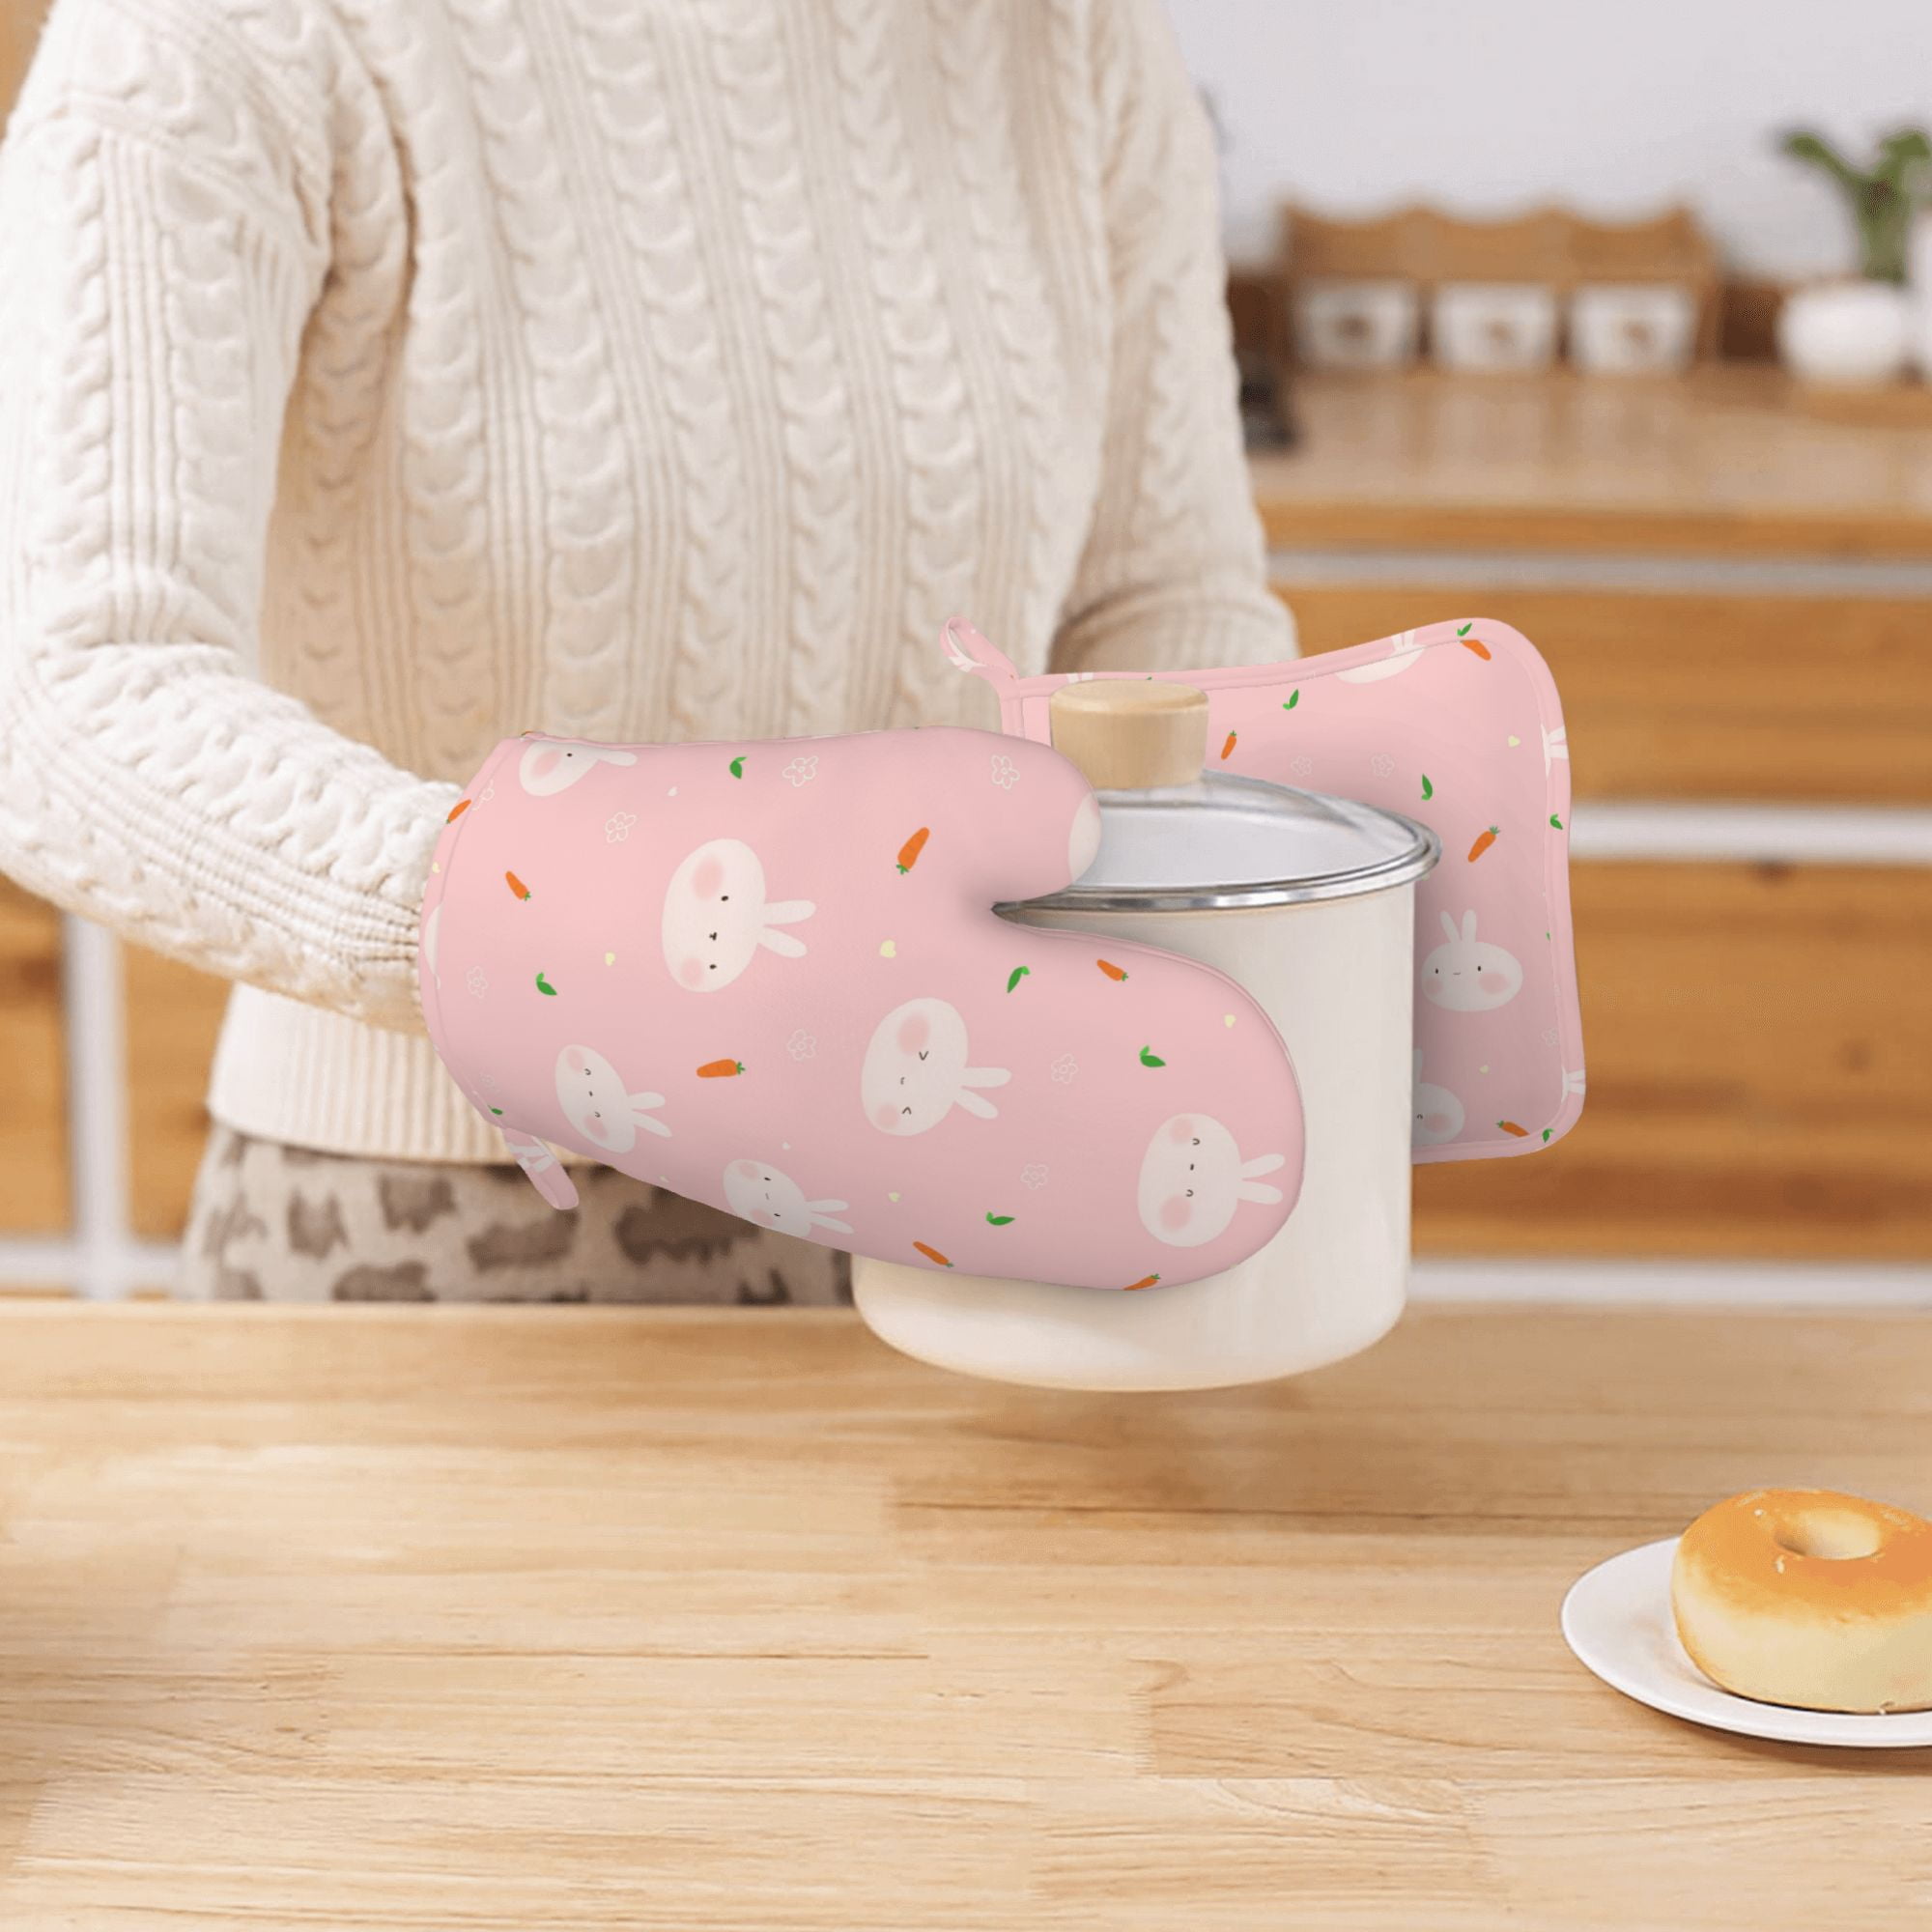  Cute Cat Dots Oven Mitts Pot Holder Set Heat Resistant Oven  Gloves Hotpads Kitchen Mittens 2-Piece Set Hot Pads and Oven Mitts for Cooking  Baking Kitchen BBQ Housewarming Gifts : Home